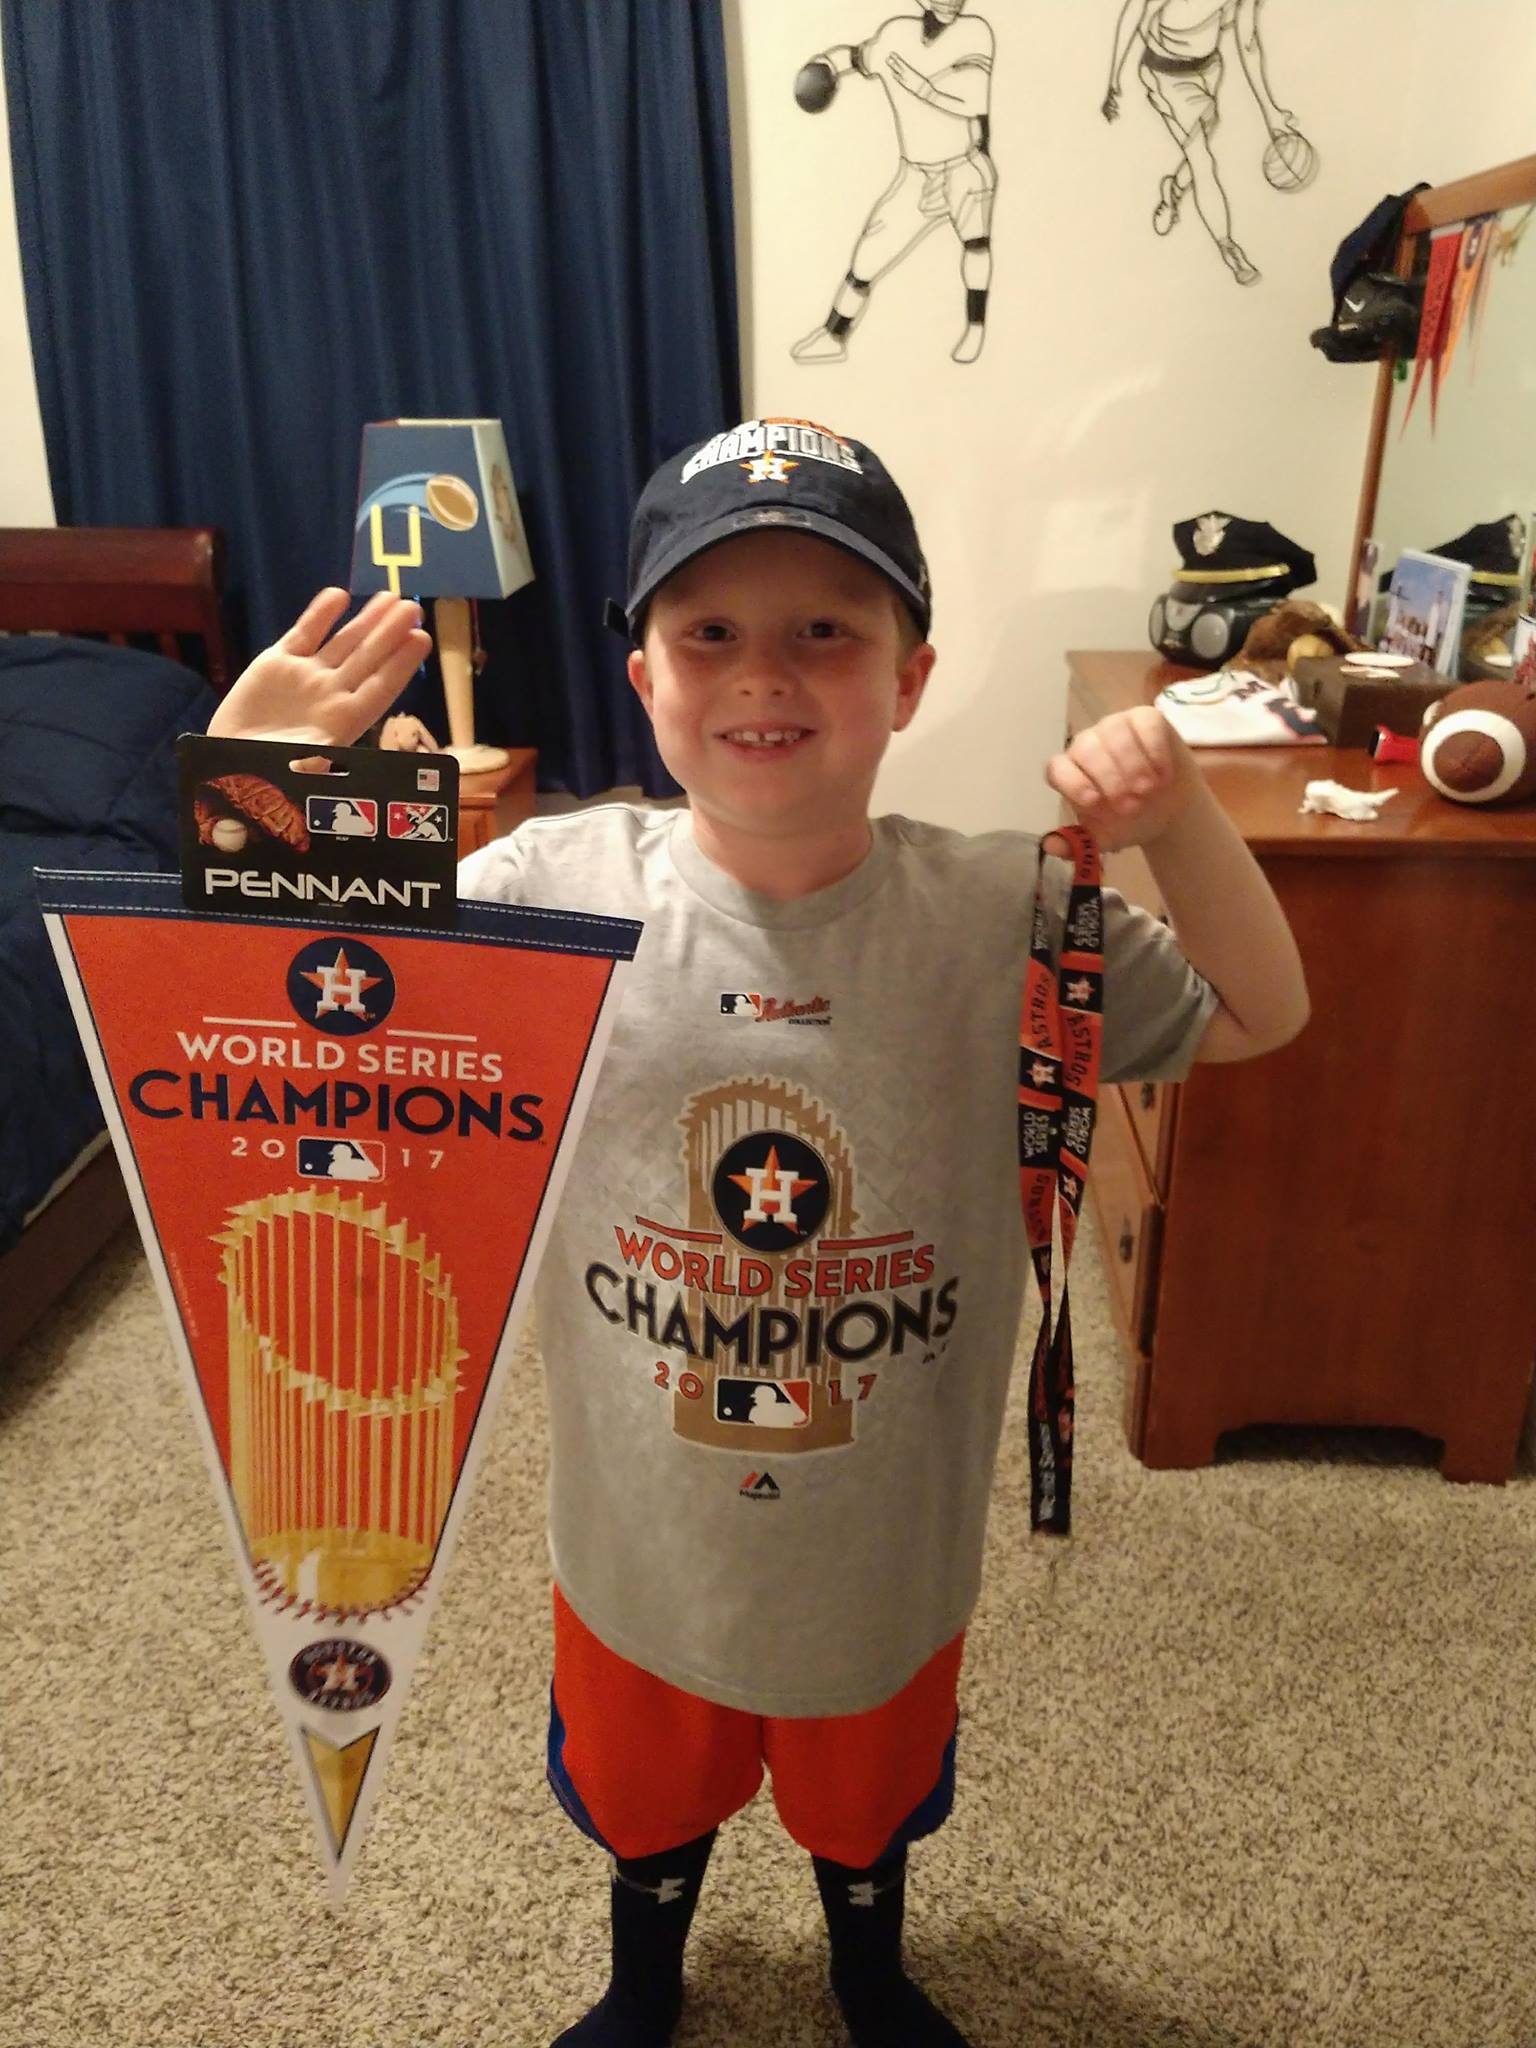 This adorable 4-year-old Astros fan wants to marry Lance McCullers